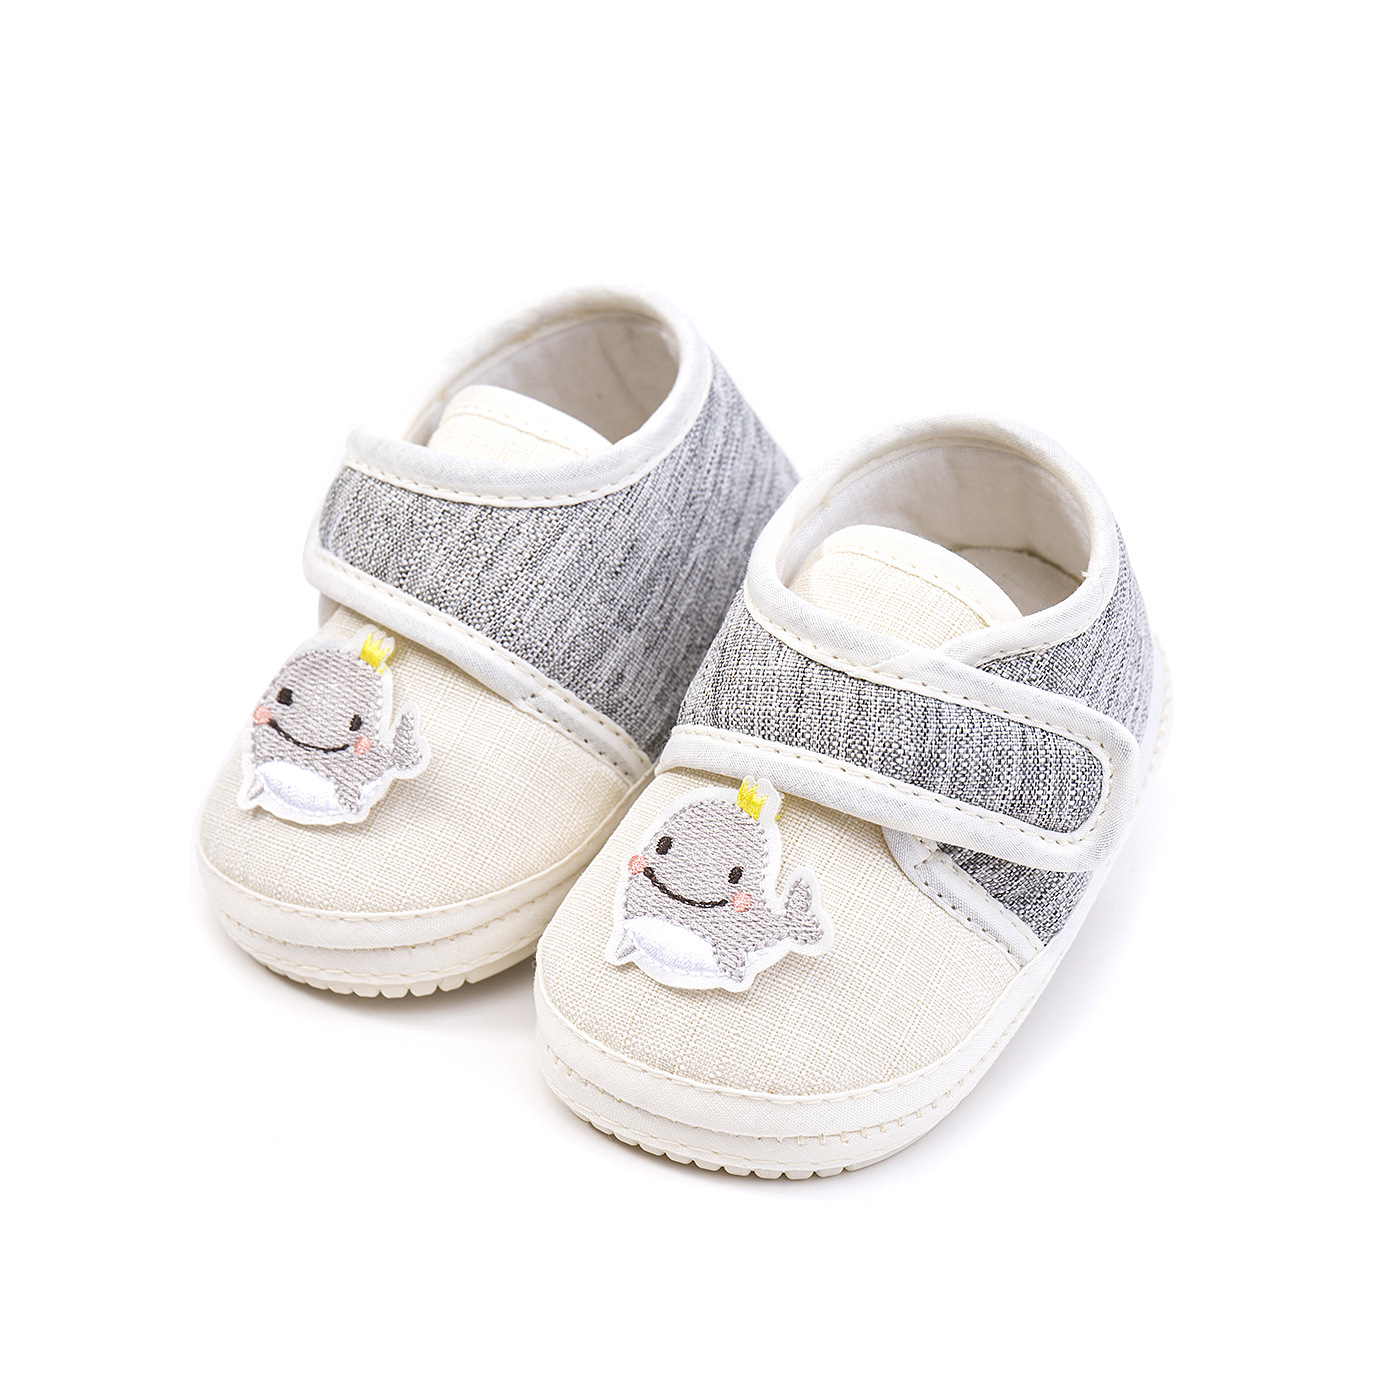 Baby Toddler Shoes Soft Bottom Summer Tight Shoes Men's and Women's Baby Shoes Newborn Eight Months Nine Months Ten Months